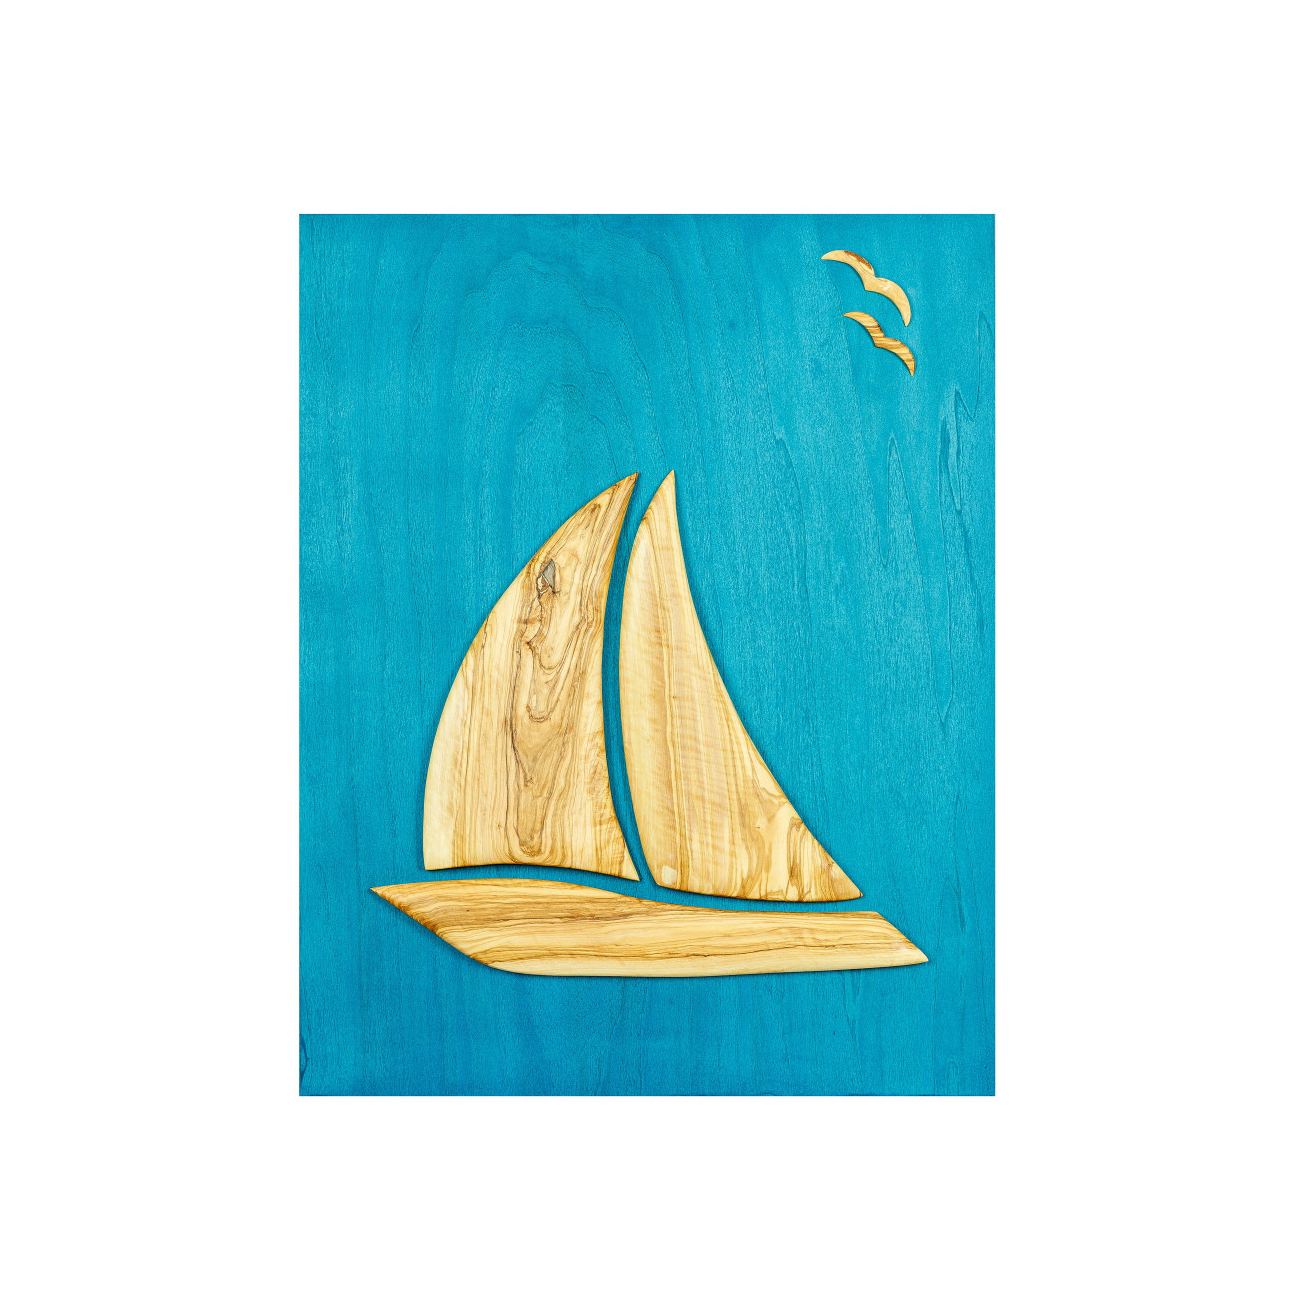 Olive Wood Sailboat, Handmade Modern Wall Decor, Blue Wooden Background,  Design A, 55x70cm. Ideal Decoration Gift. Large Size